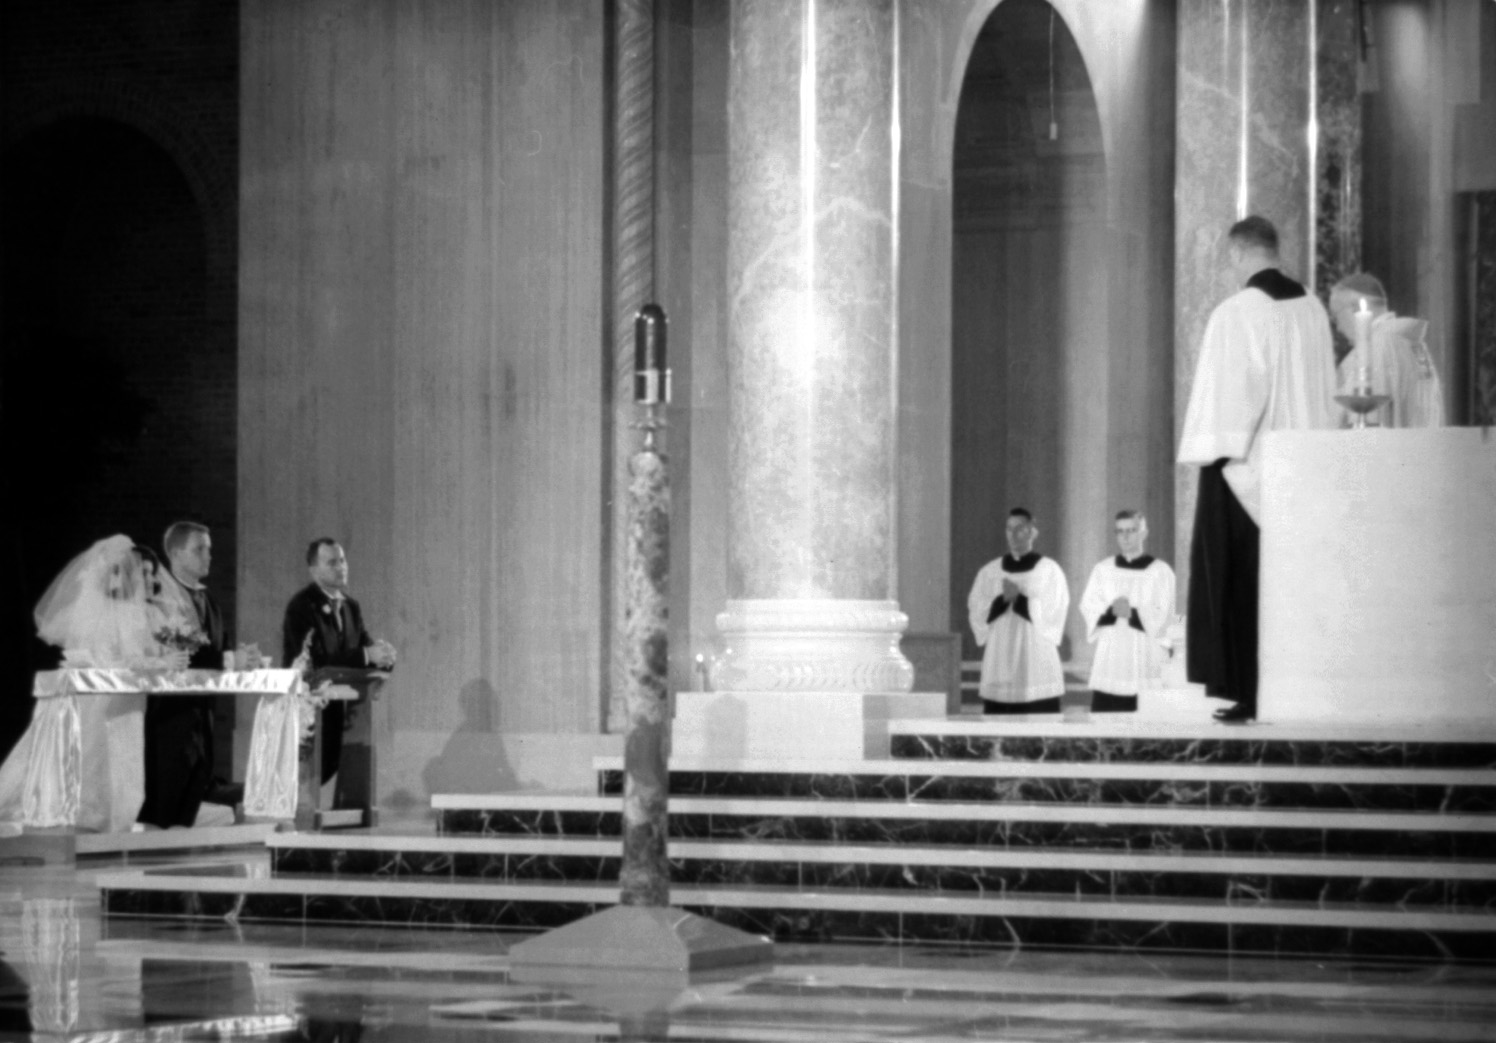 Nugent–Johnson wedding at the National Shrine of the Immaculate Conception, Washington, D.C., in August, 1966.